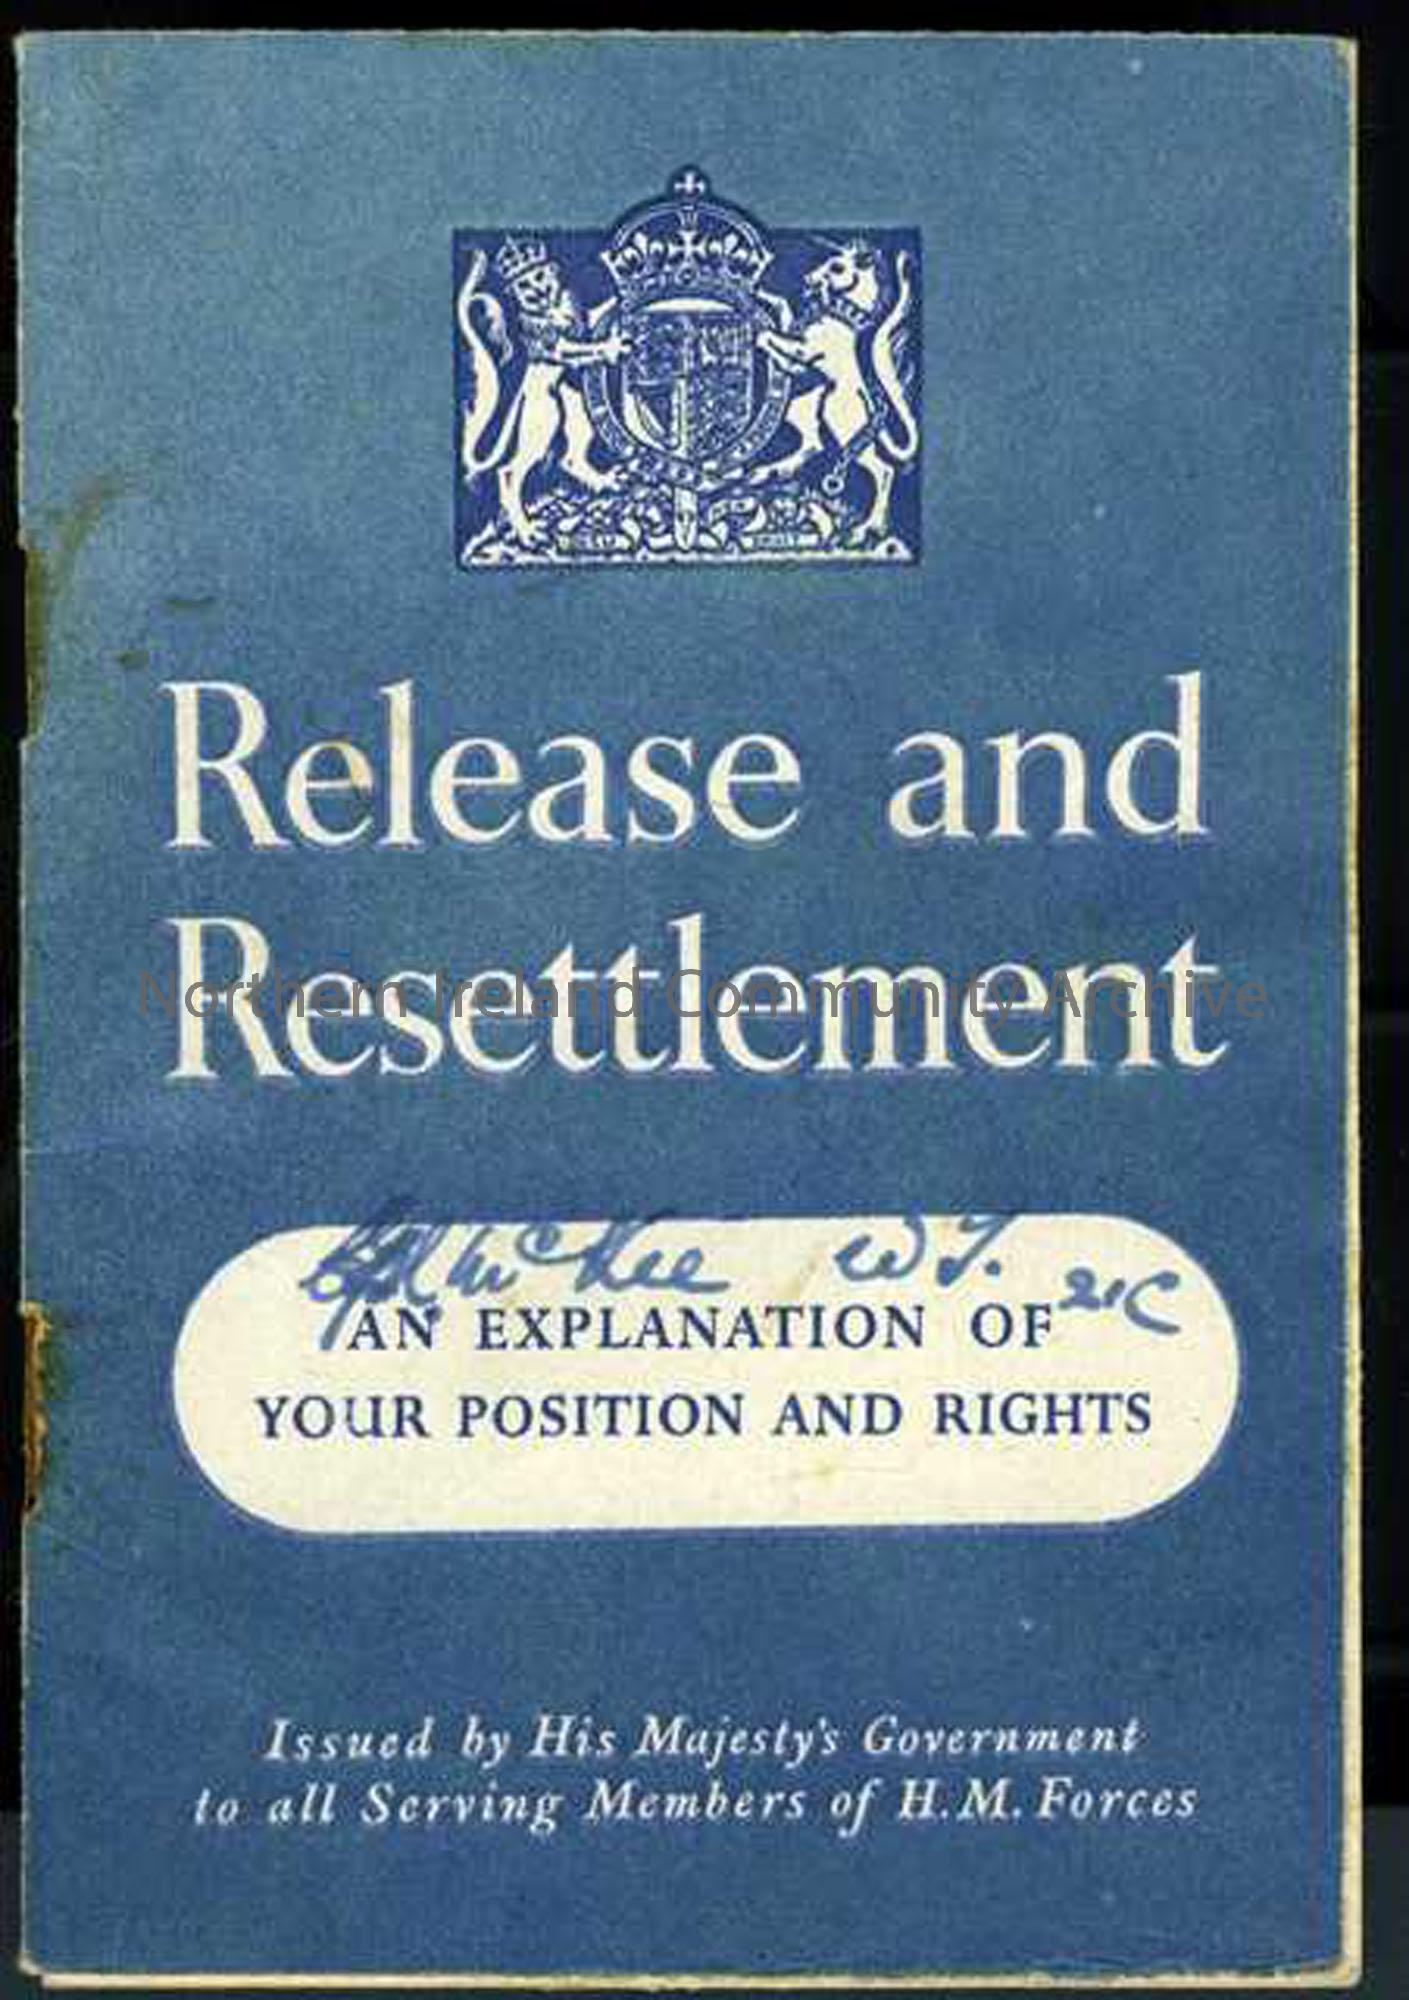 ‘Release and Resettlement’ booklet on a soldiers rights